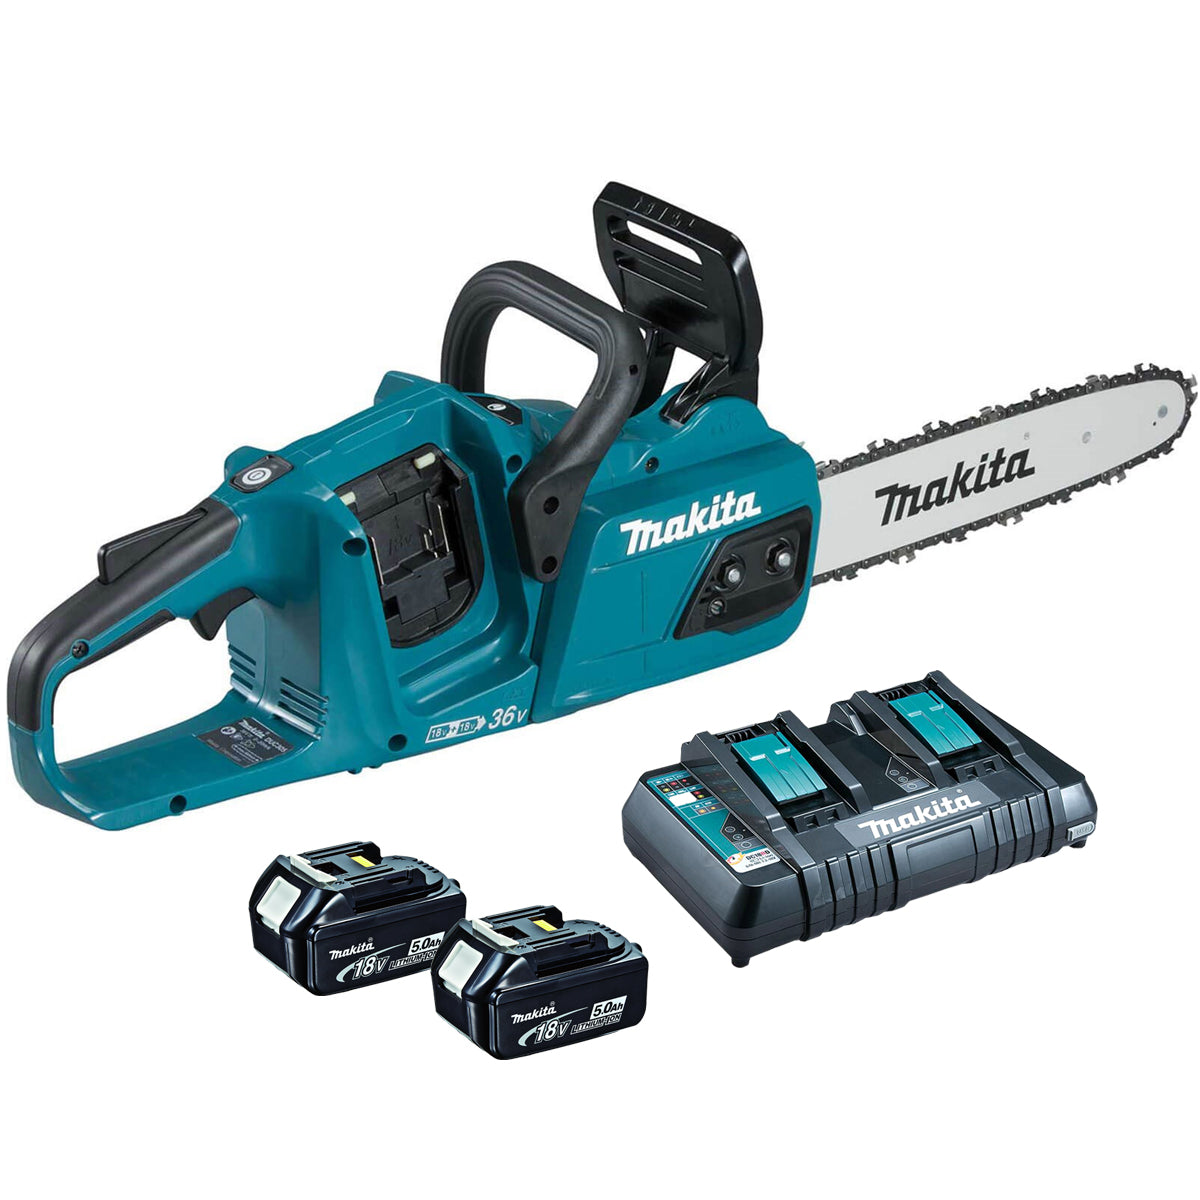 Makita DUC305PT2 36V Brushless Chainsaw 30cm with 2 x 5.0Ah Batteries & Charger